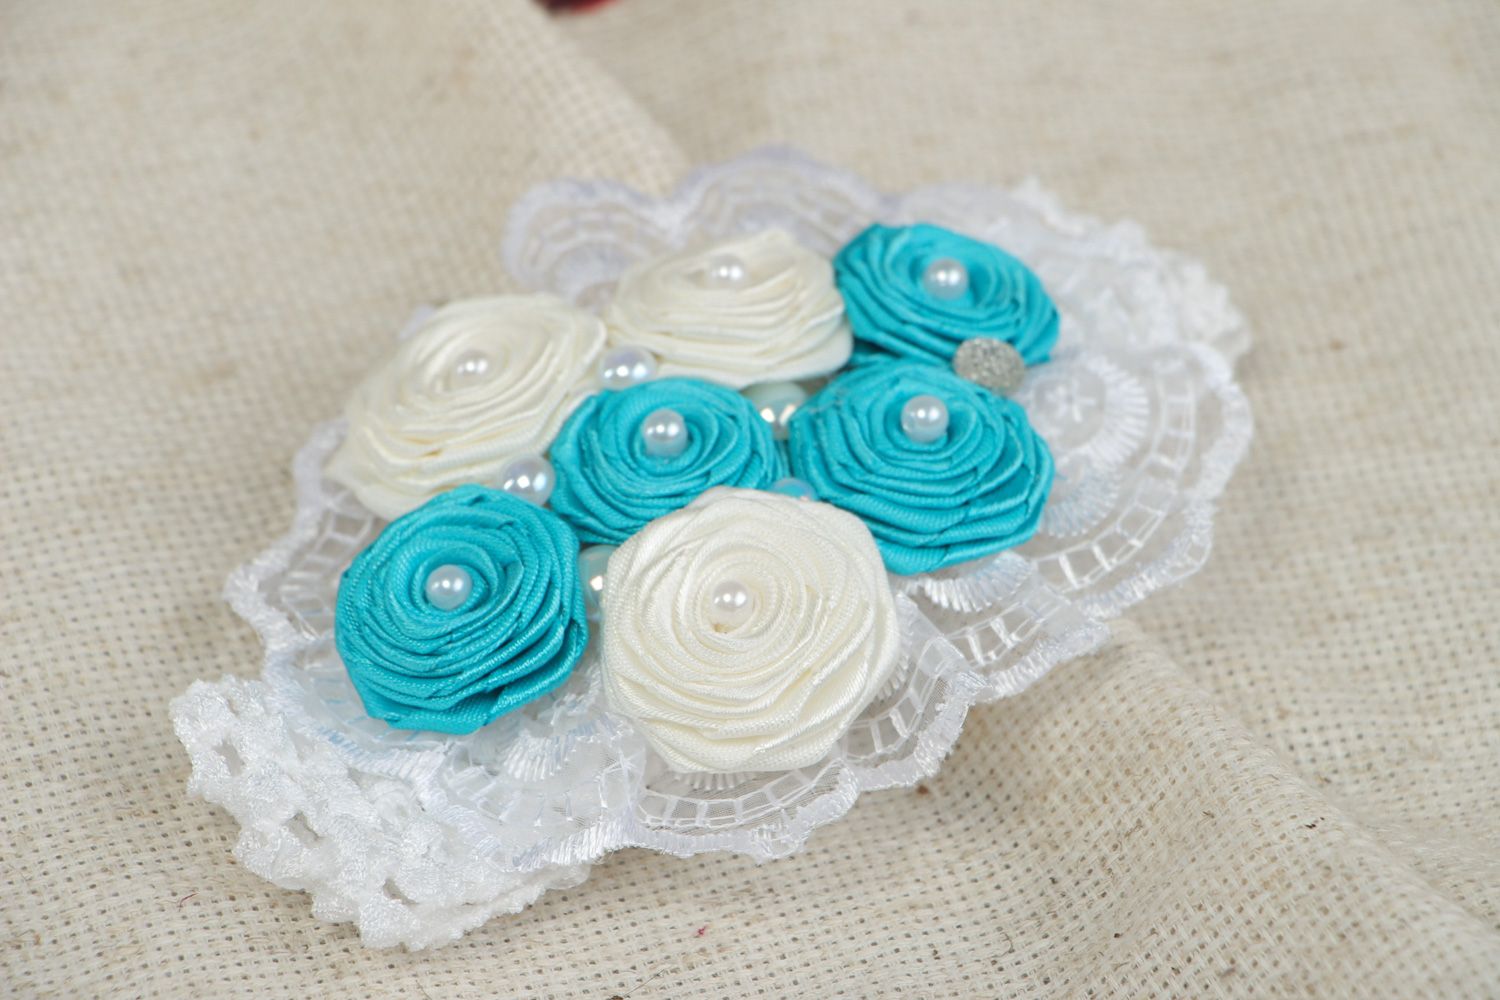 Stylish handmade floral headband with satin ribbons in white and blue colors photo 5